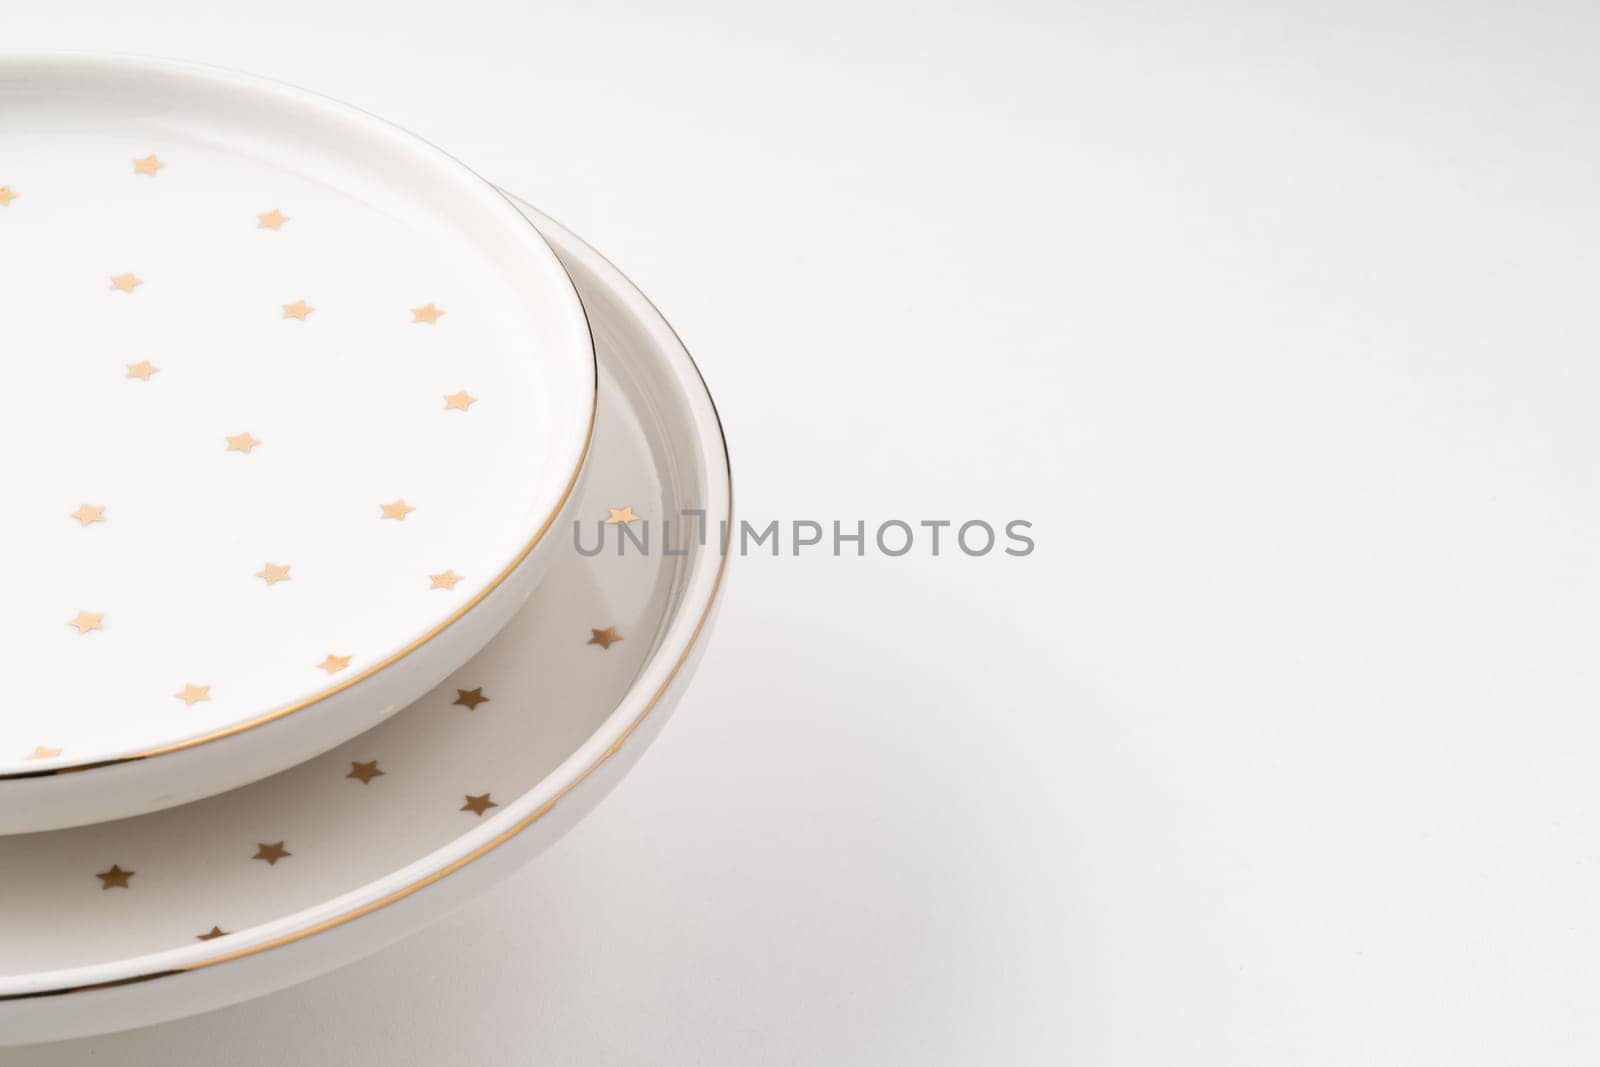 The ceramic plates isolated on white background